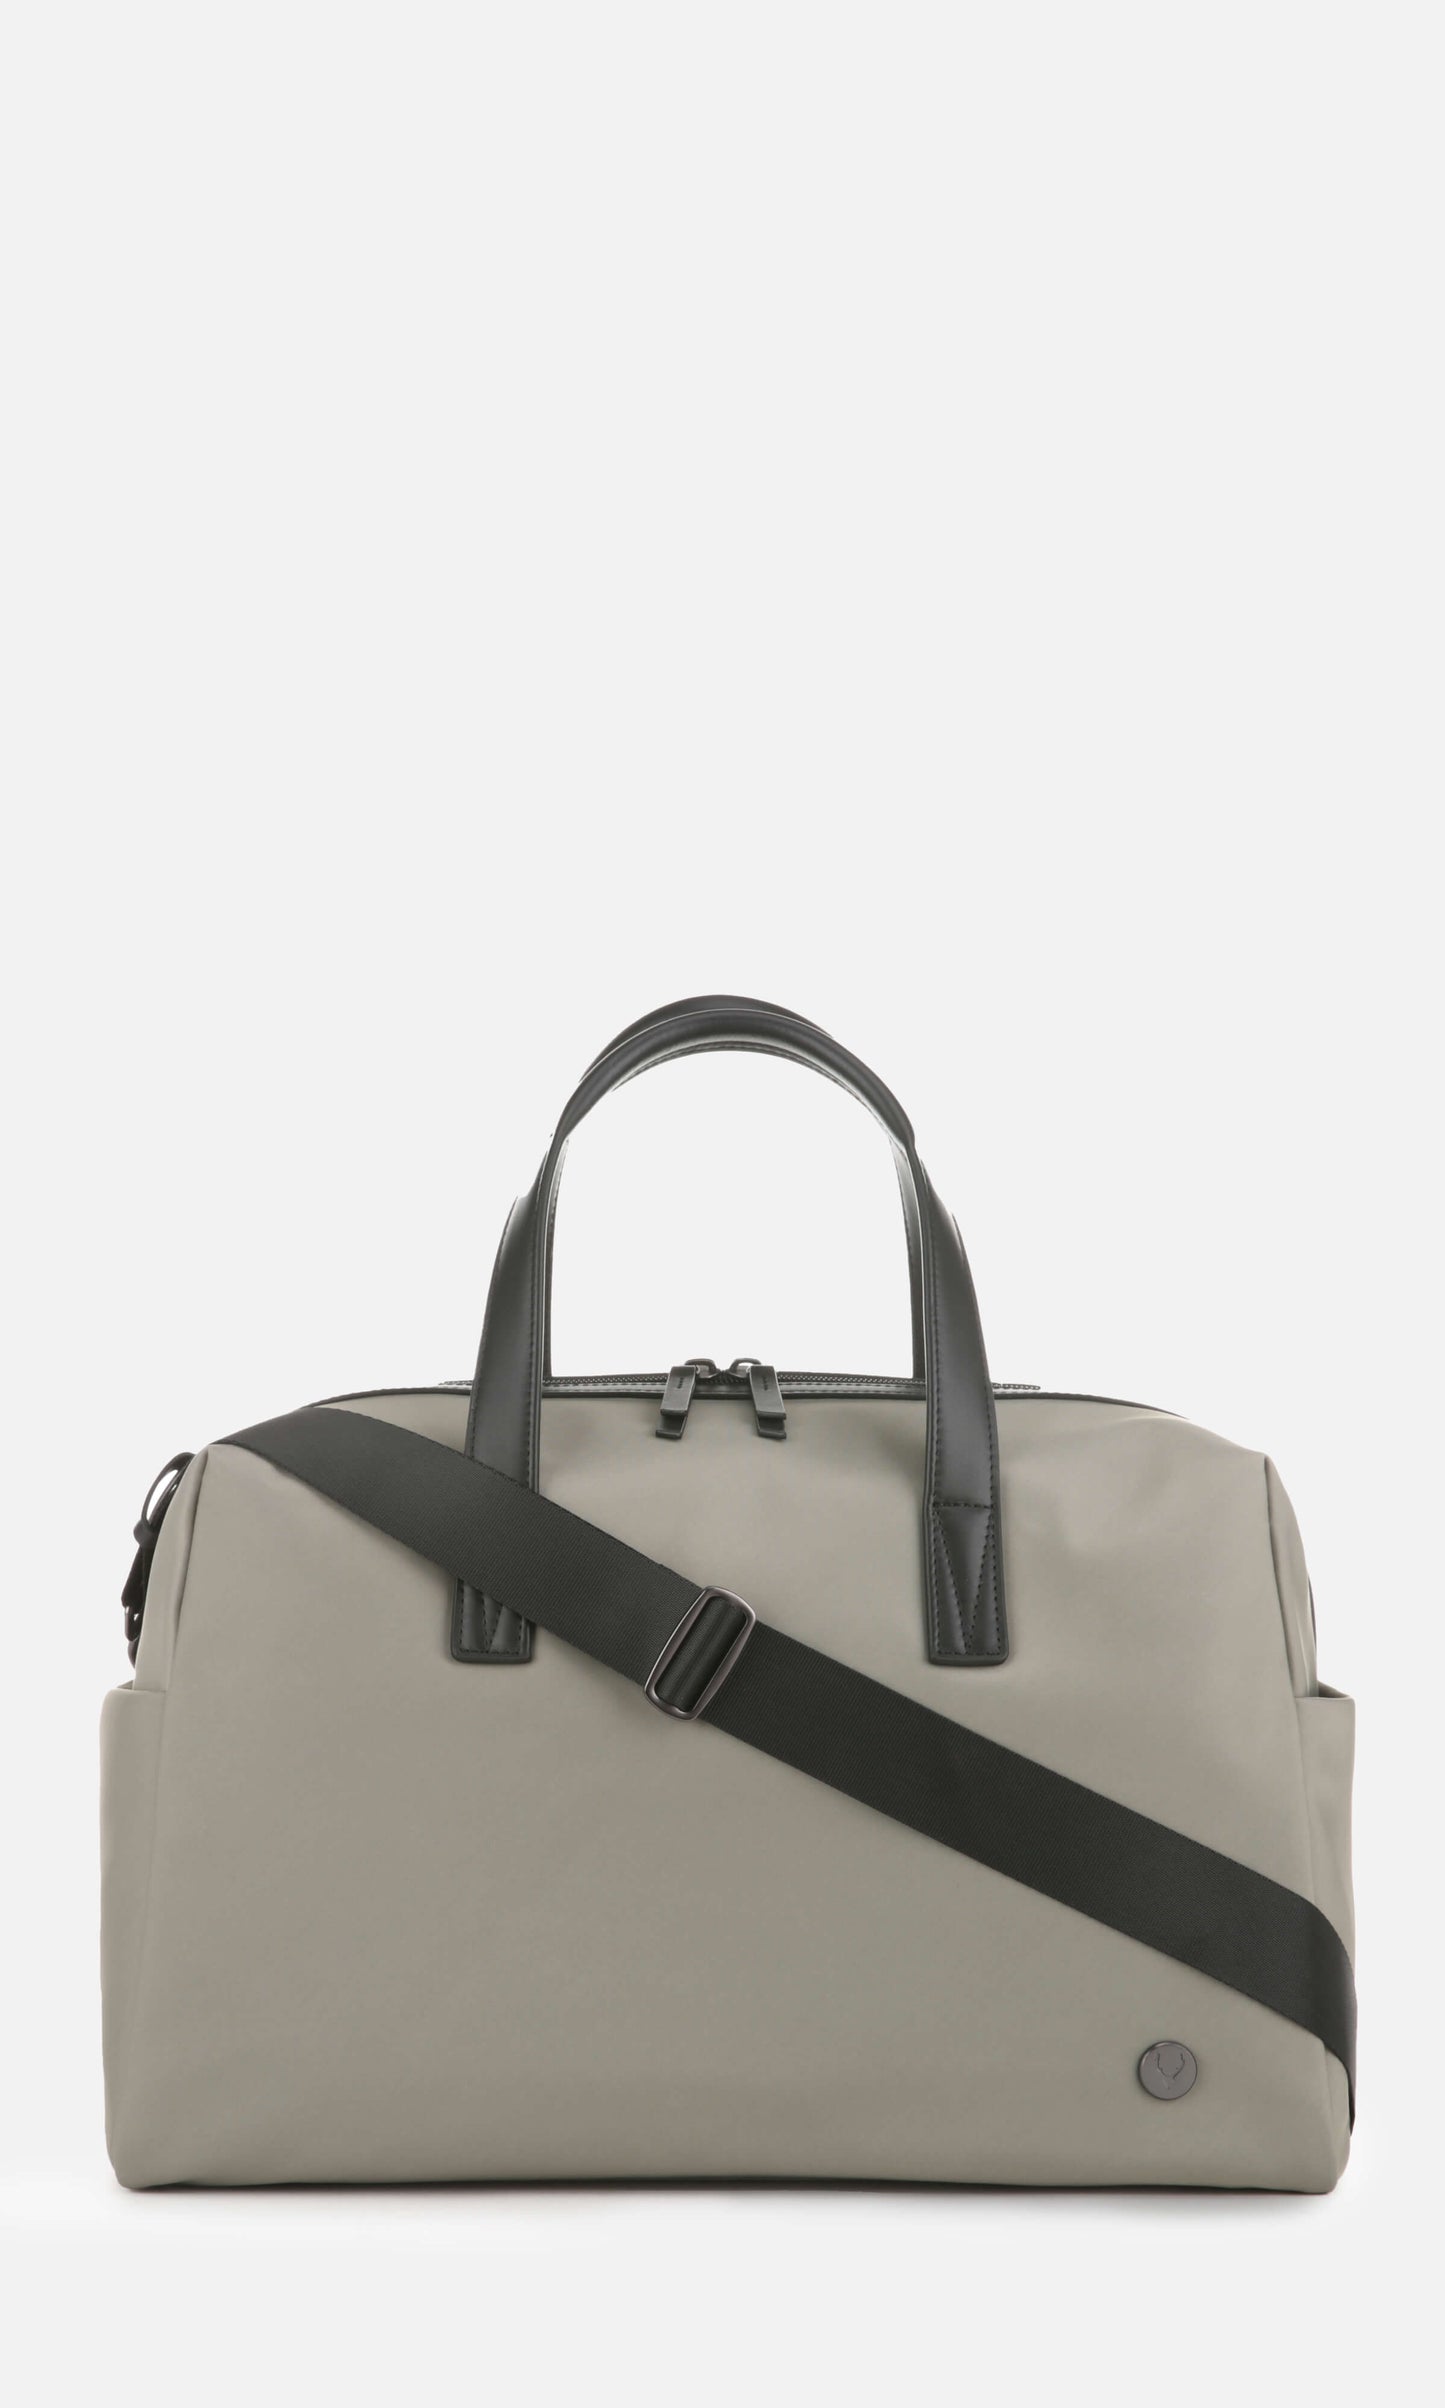 Chelsea overnight bag in sage